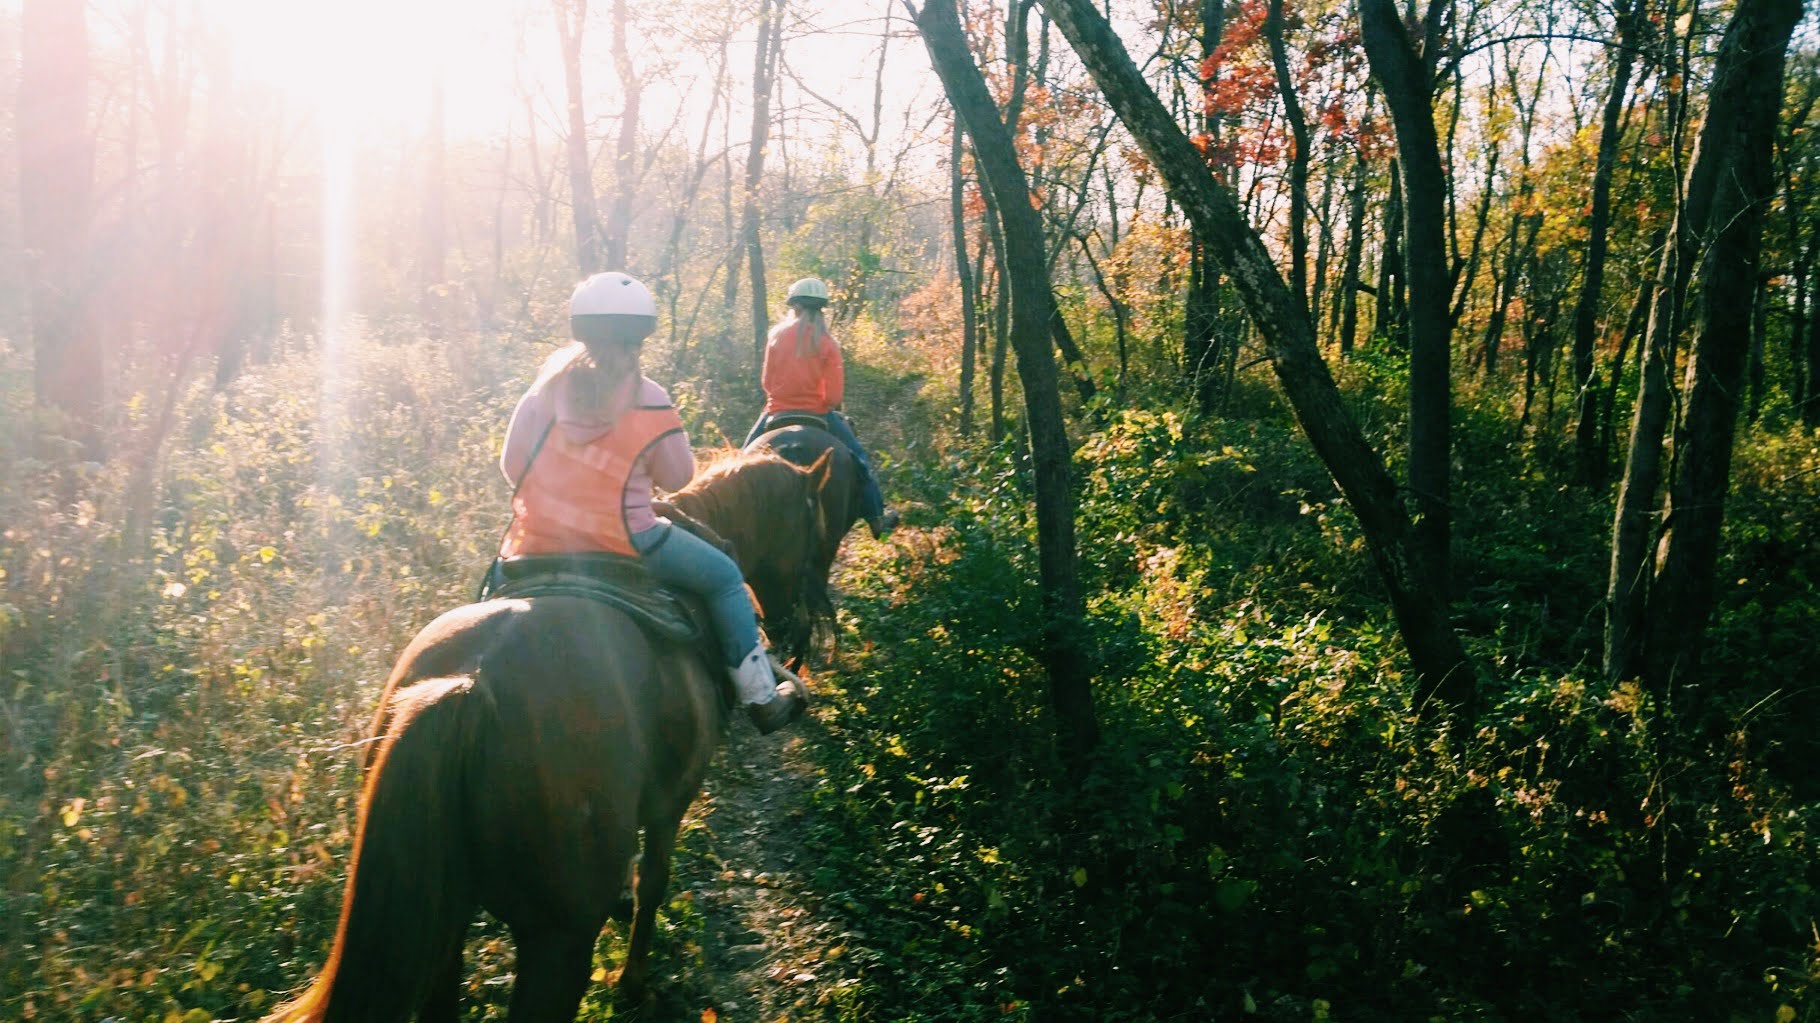 Trail Ride on a Fall Day